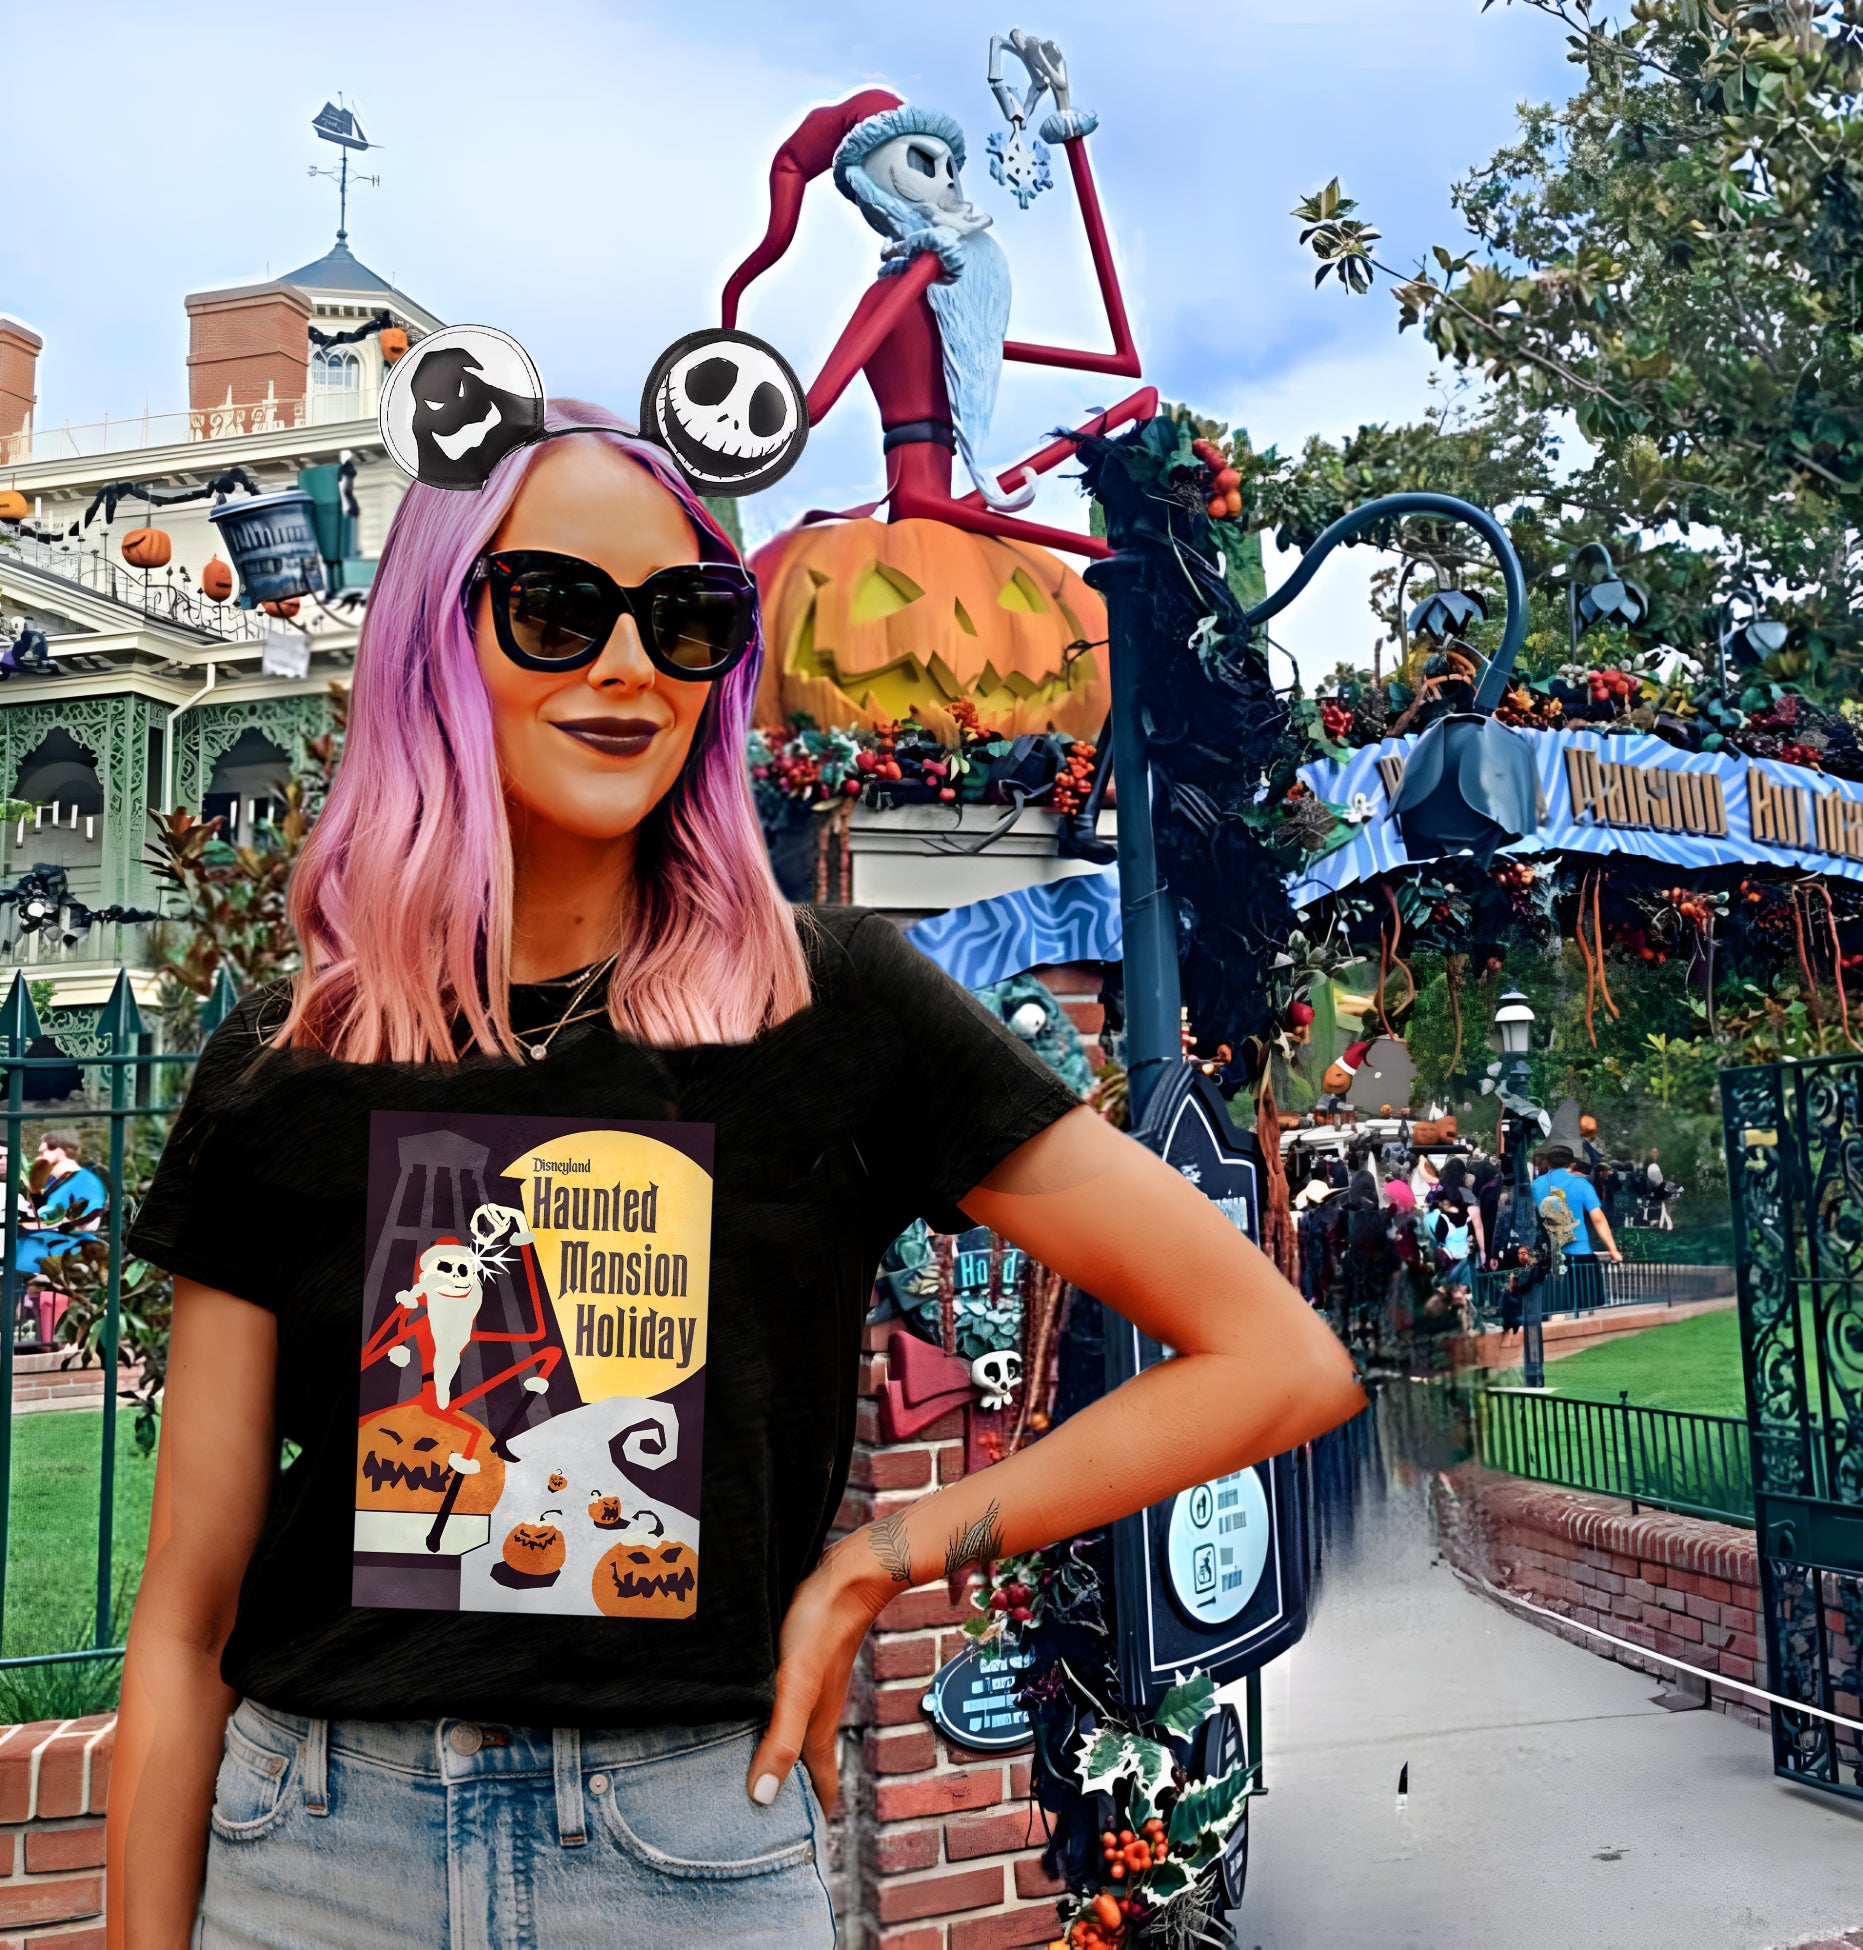 Haunted Mansion holiday Overlay Nightmare Before Christmas t shirt t-shirt